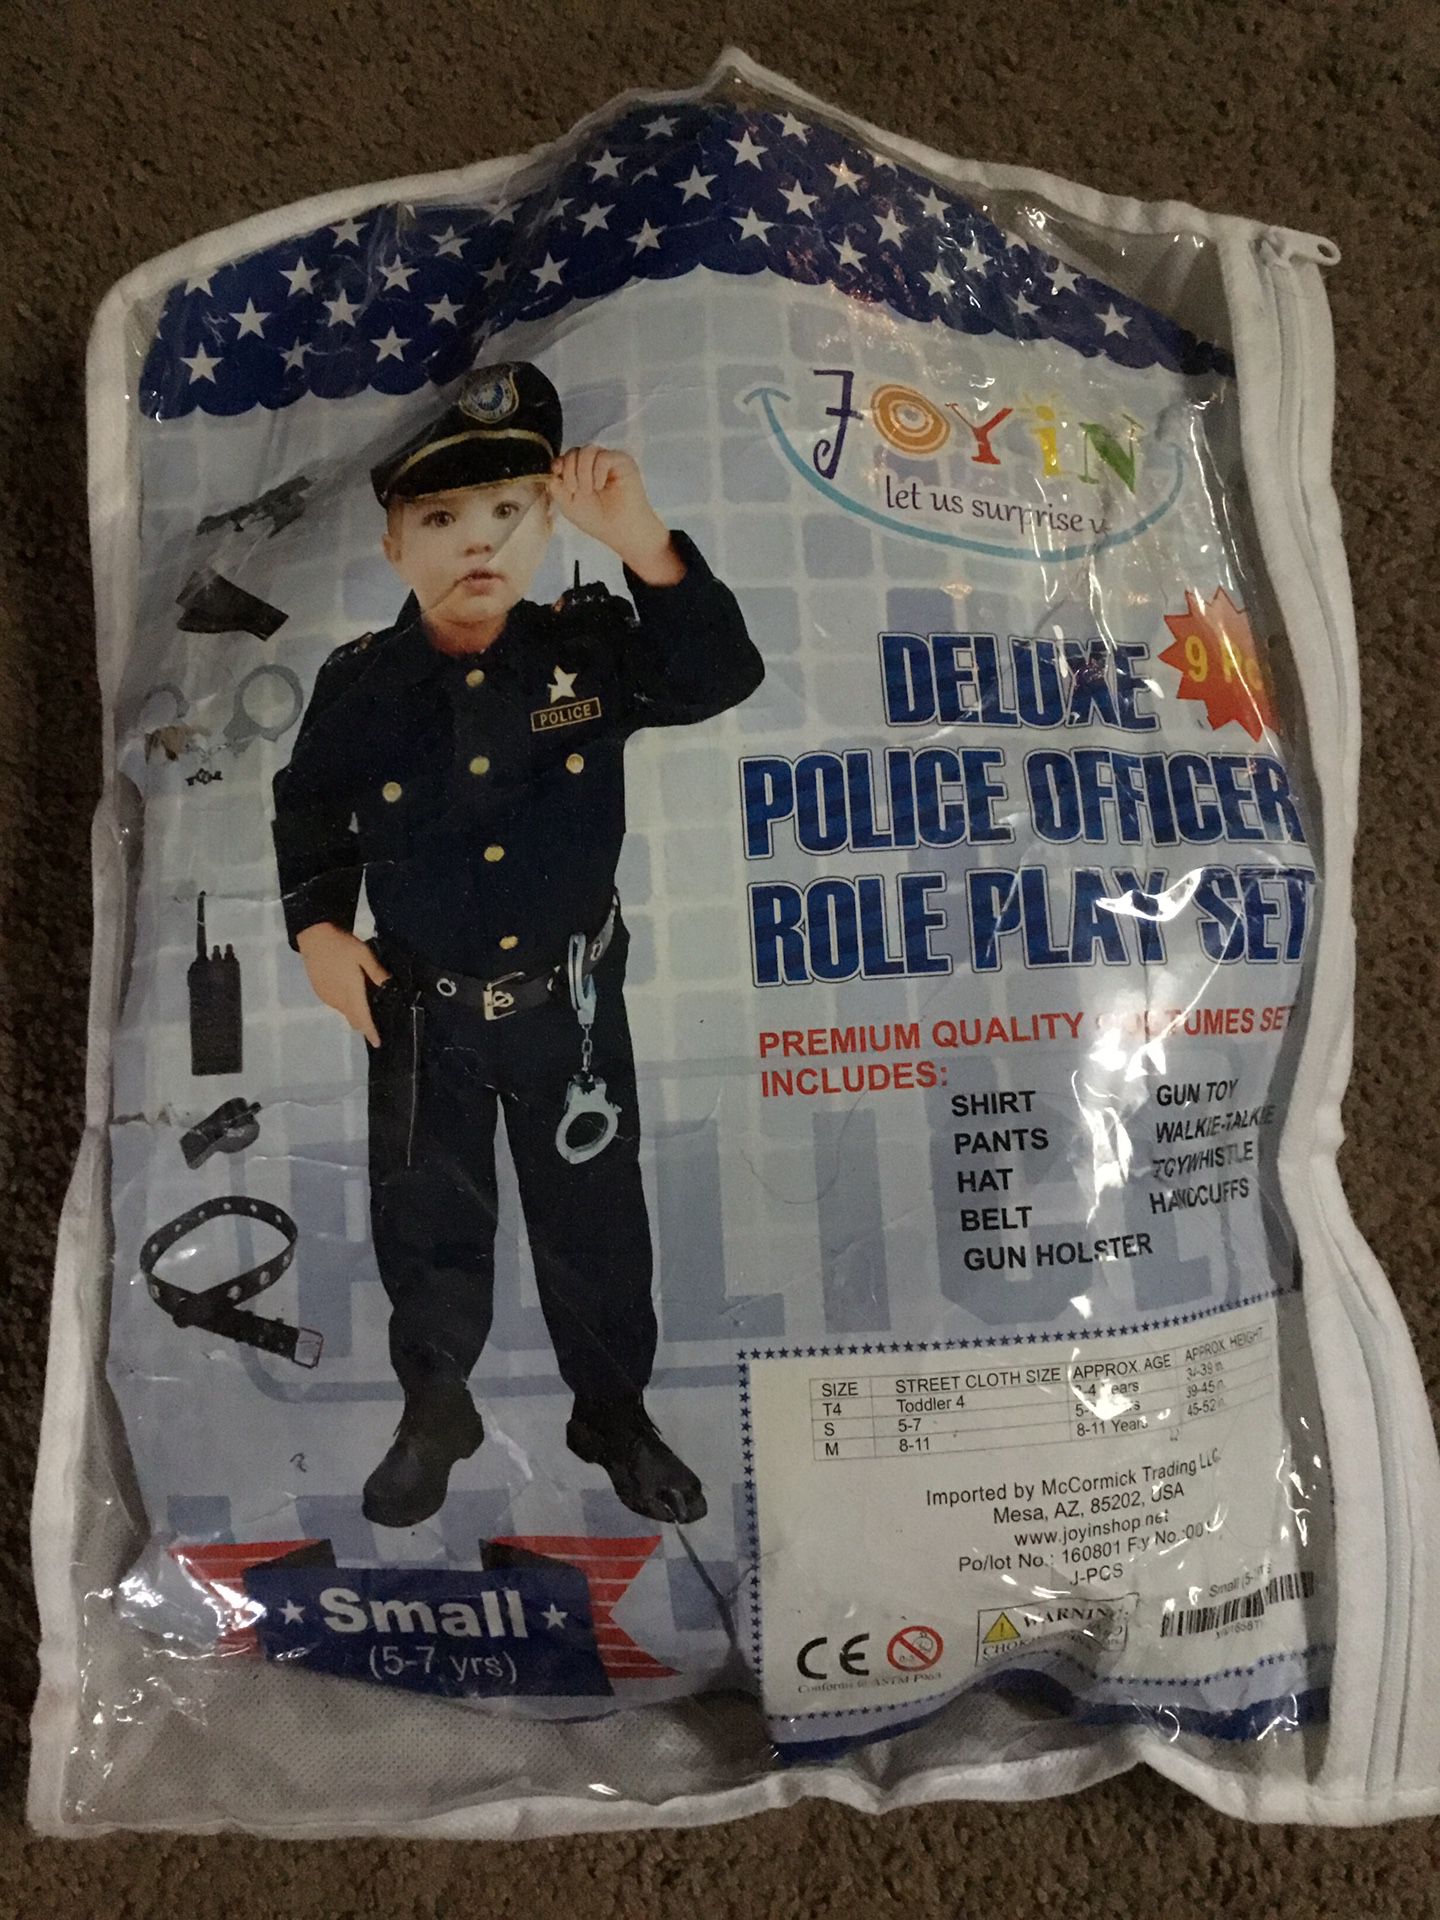 Deluxe police officer